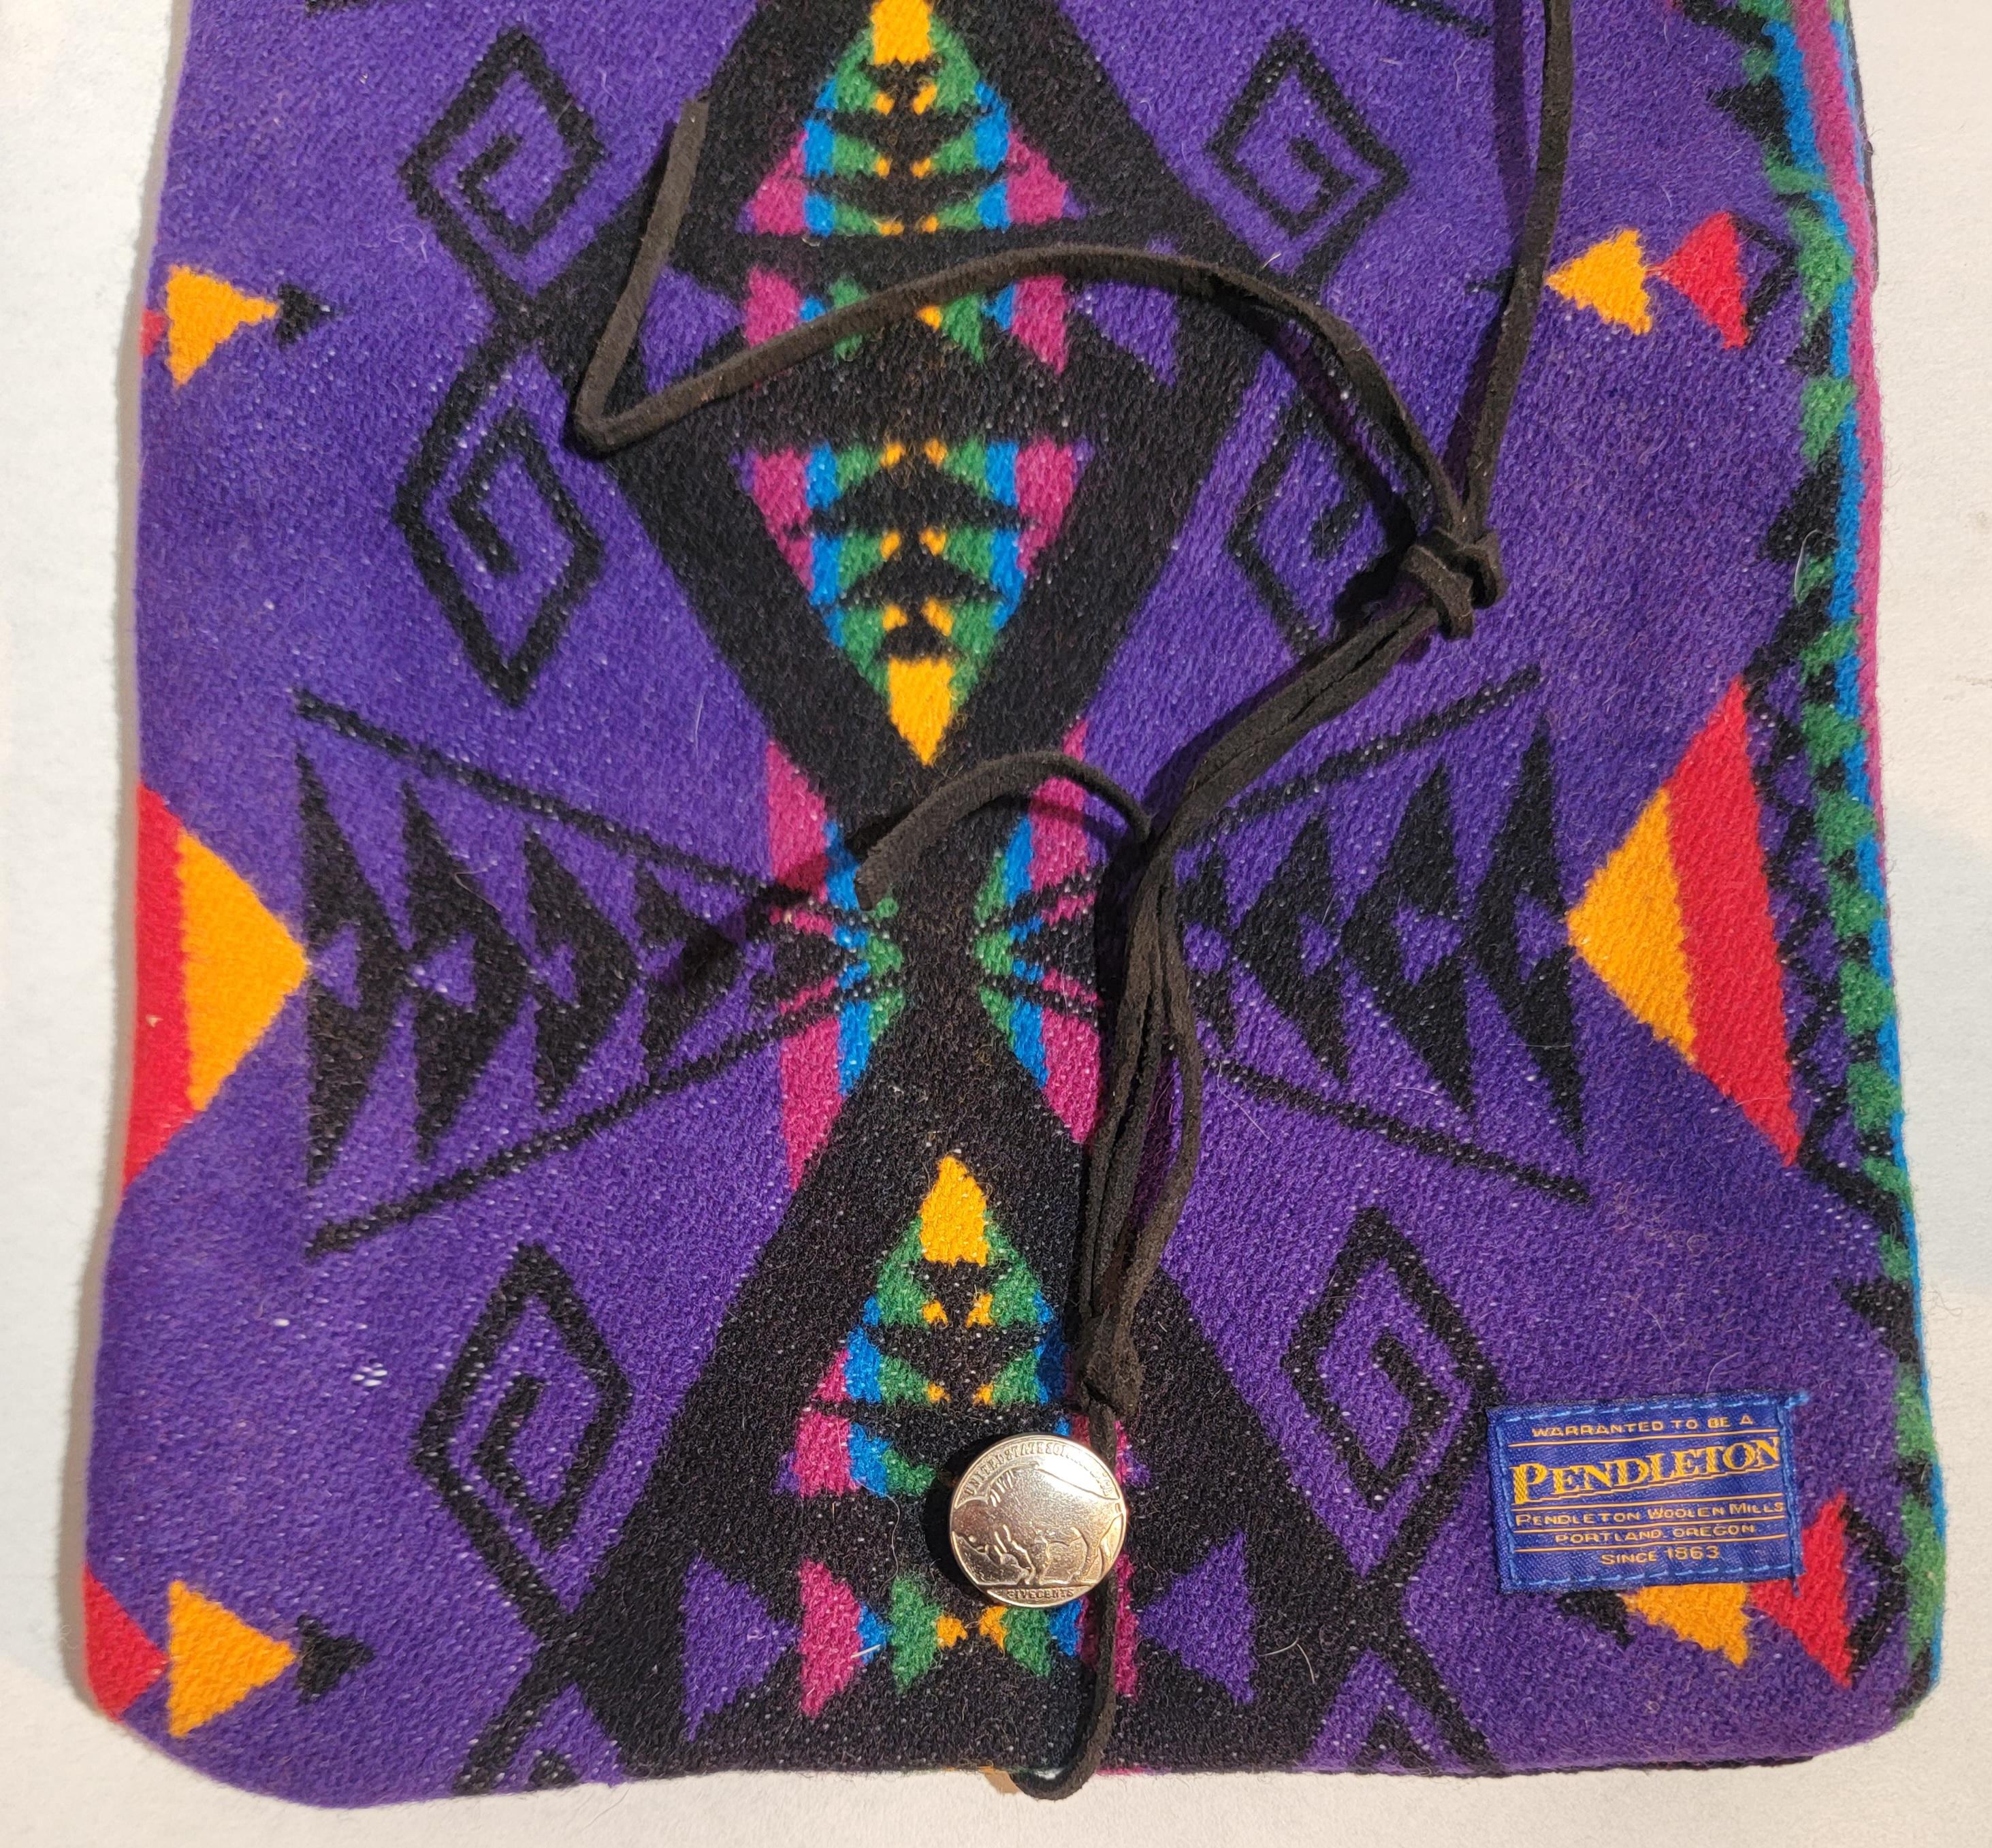 These amazing Pendleton Jewelry bags are in amazing as found condition.They have leather ties & vintage Indian head button closures.